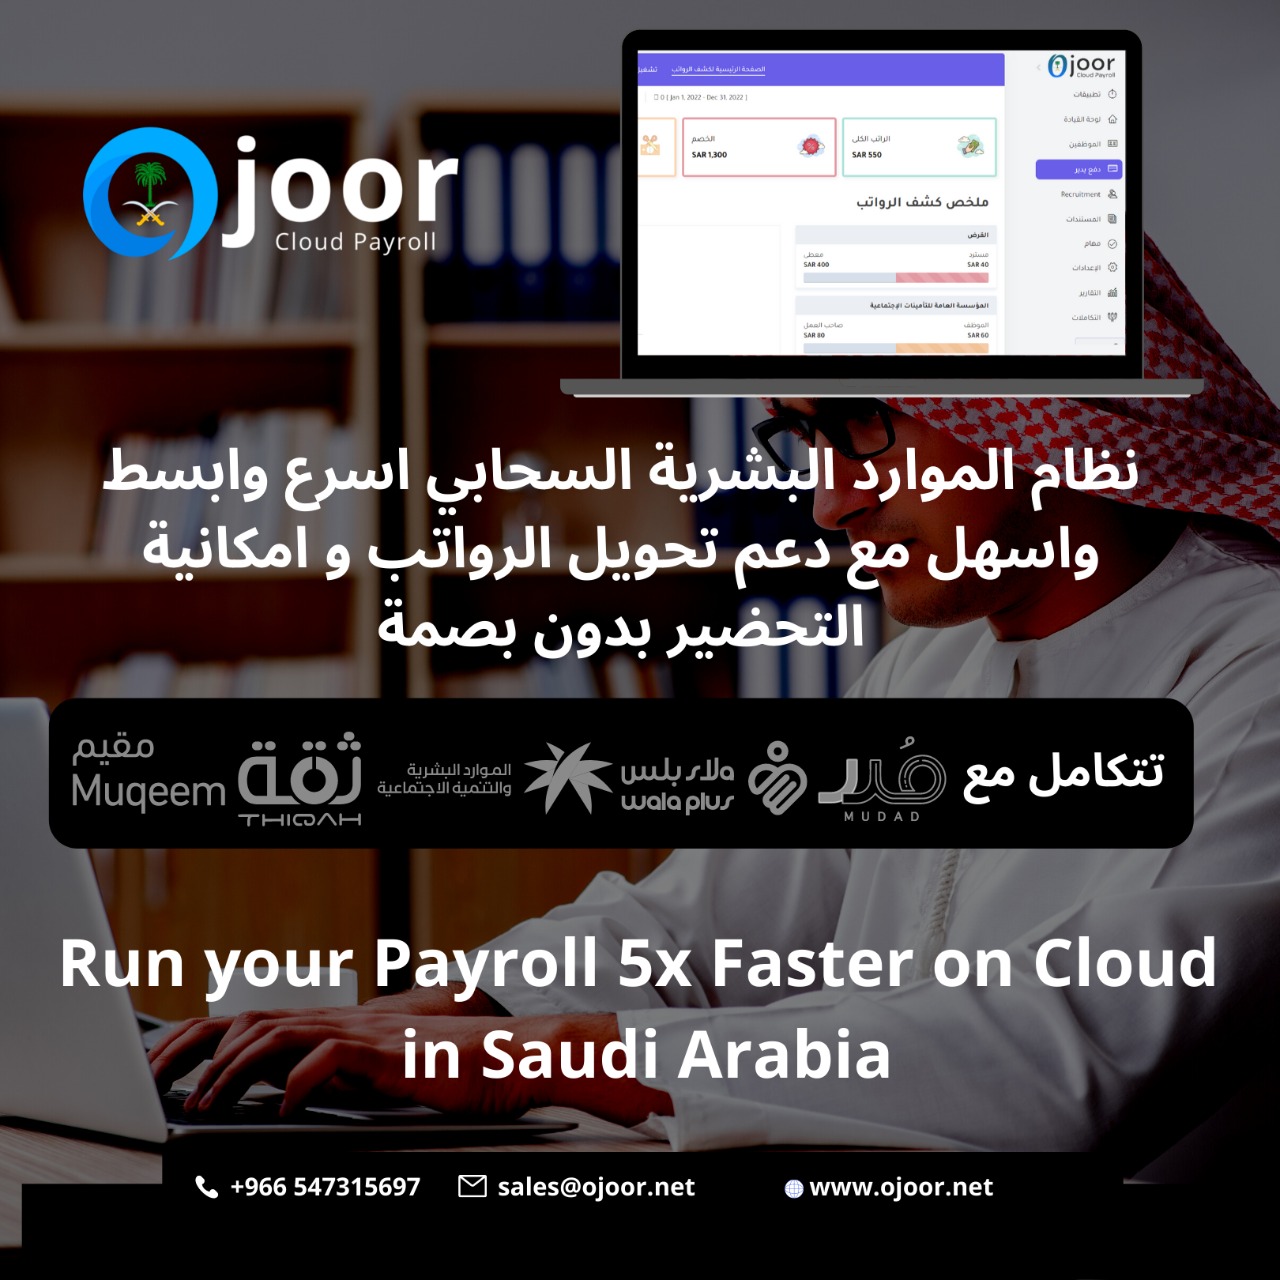 What is the user interface like for Payroll Software in Saudi Arabia?